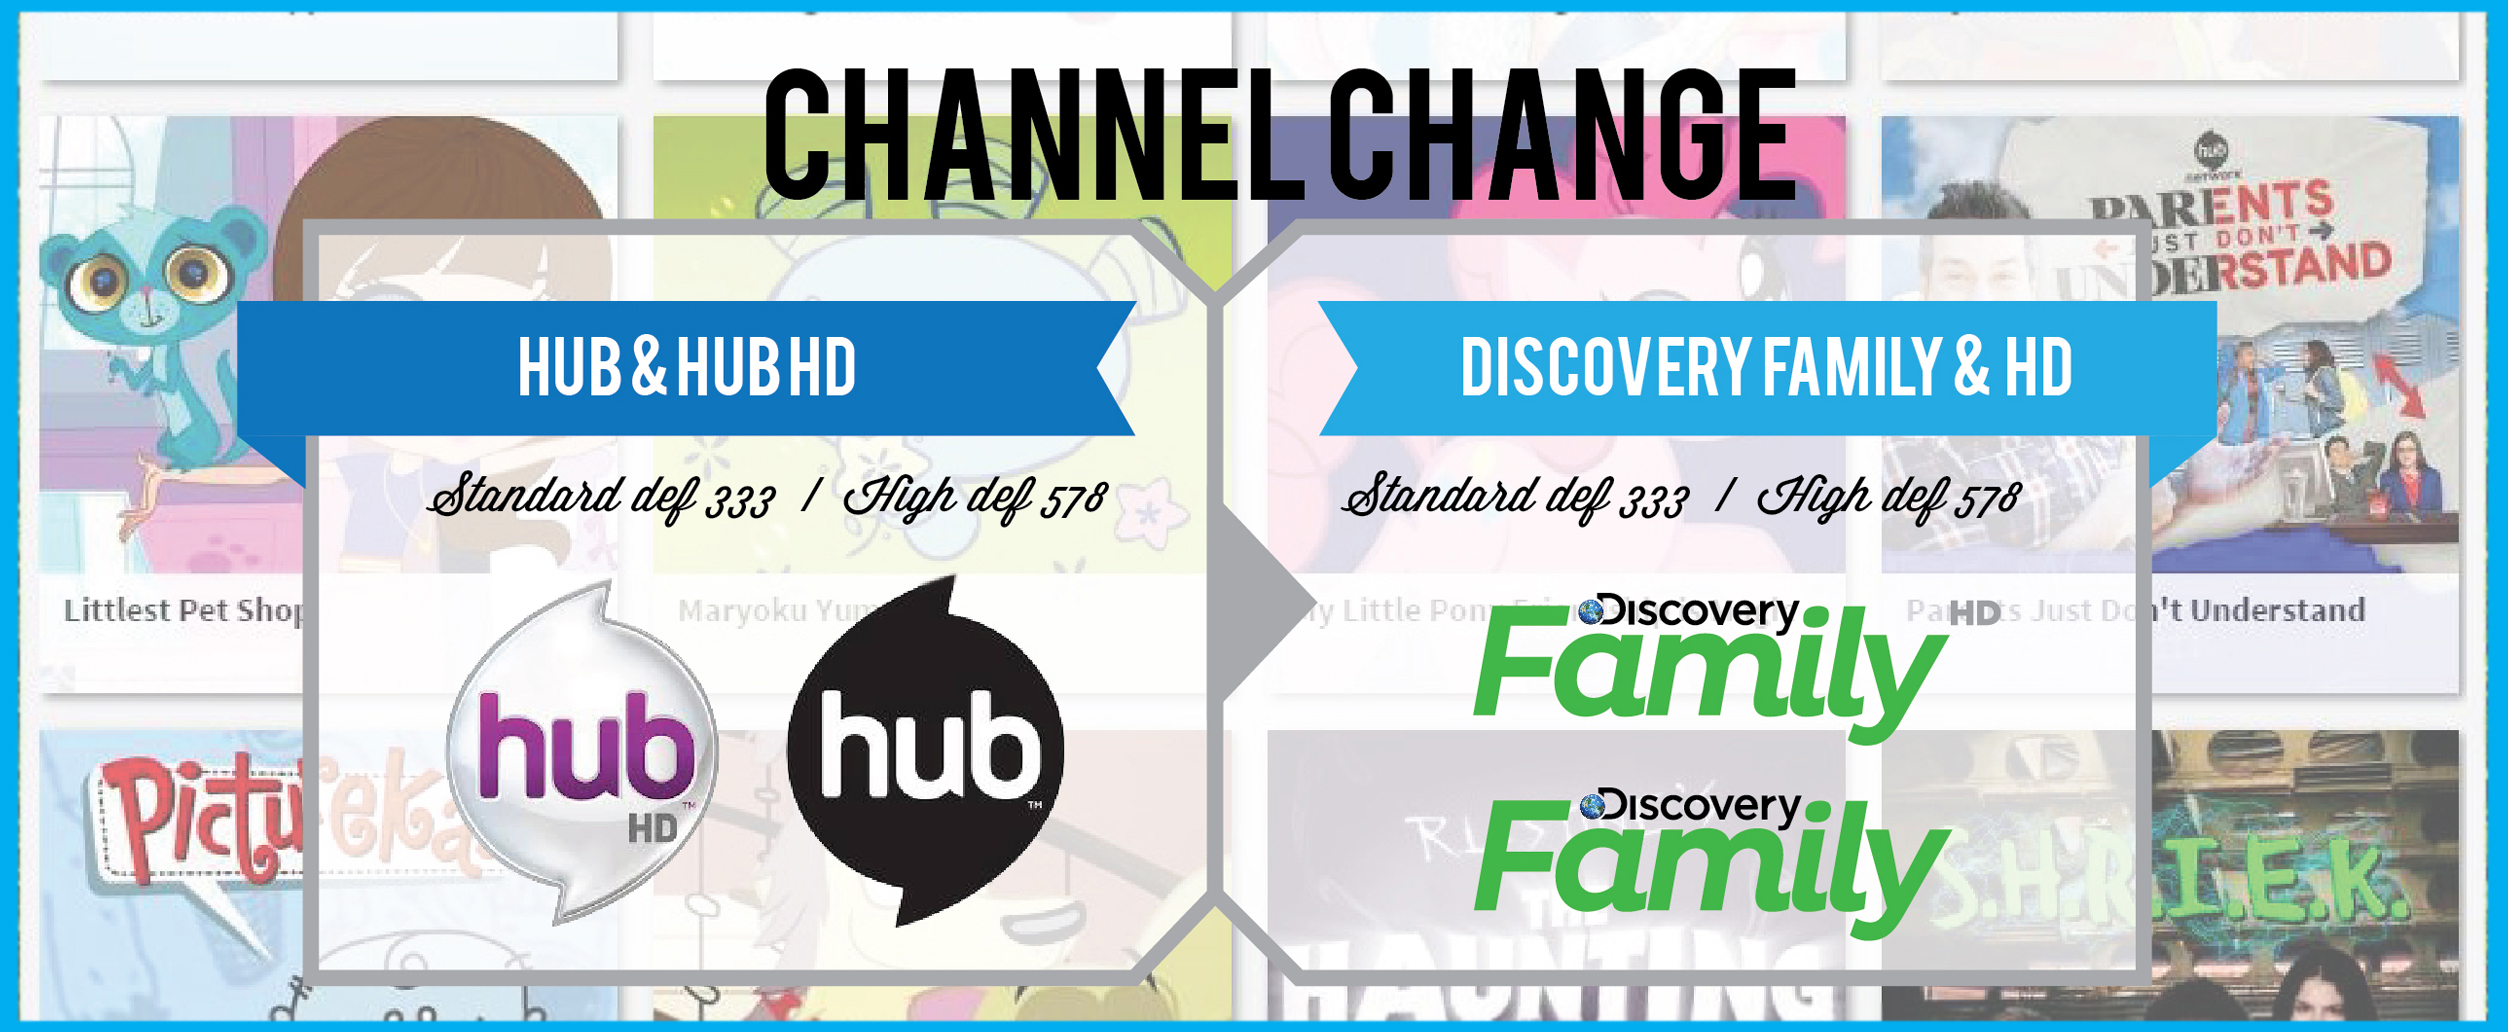 Discovery family. Discovery Family logo. Hub channel. Discovery Family go!.